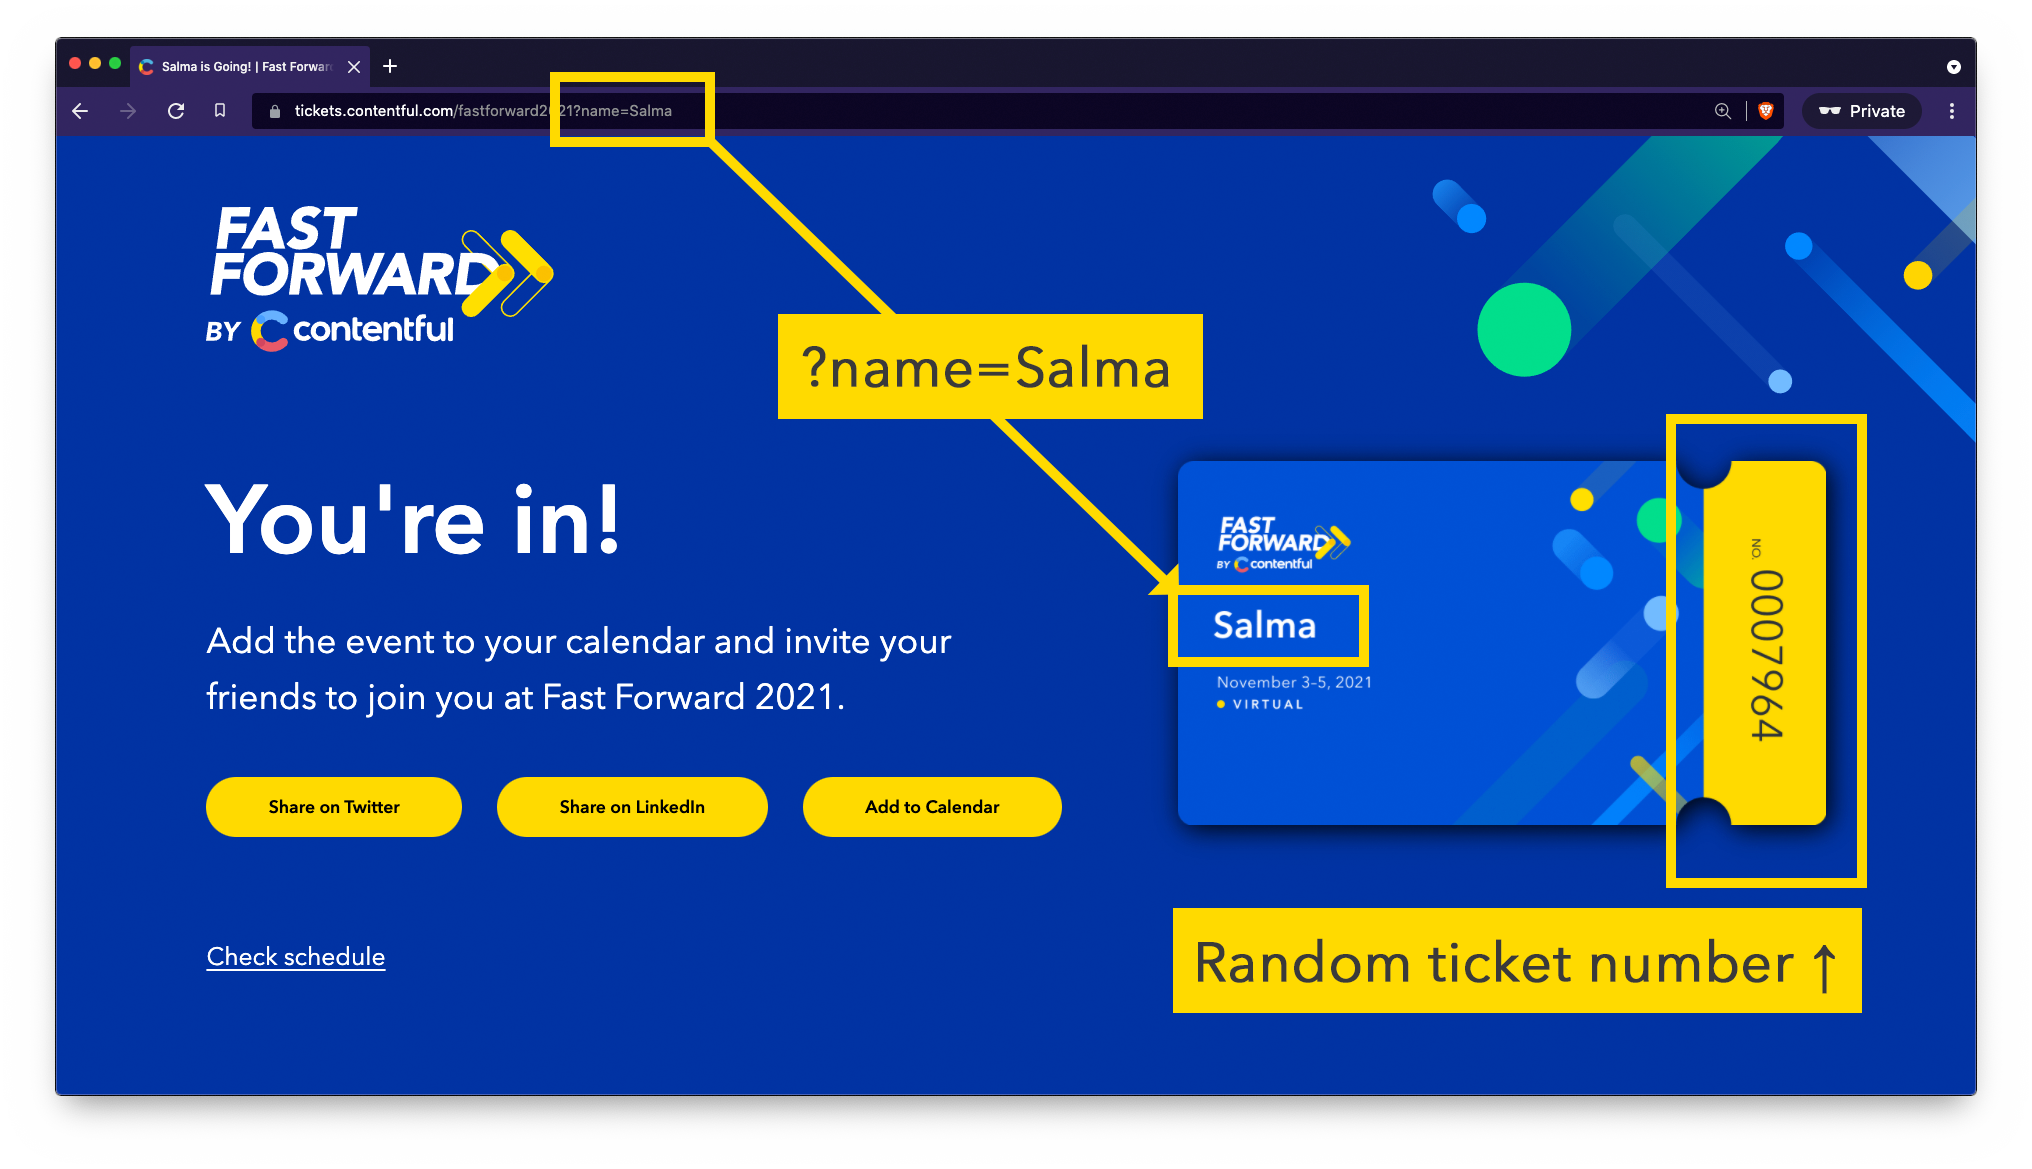 A screenshot of the Fast Forward ticket app, showing how the parameters from the URL translate to the content on the page. You can see that the name parameter from the URL is embedded onto the image of the ticket, and the random ticket number is also highlighted at the right of the ticket.